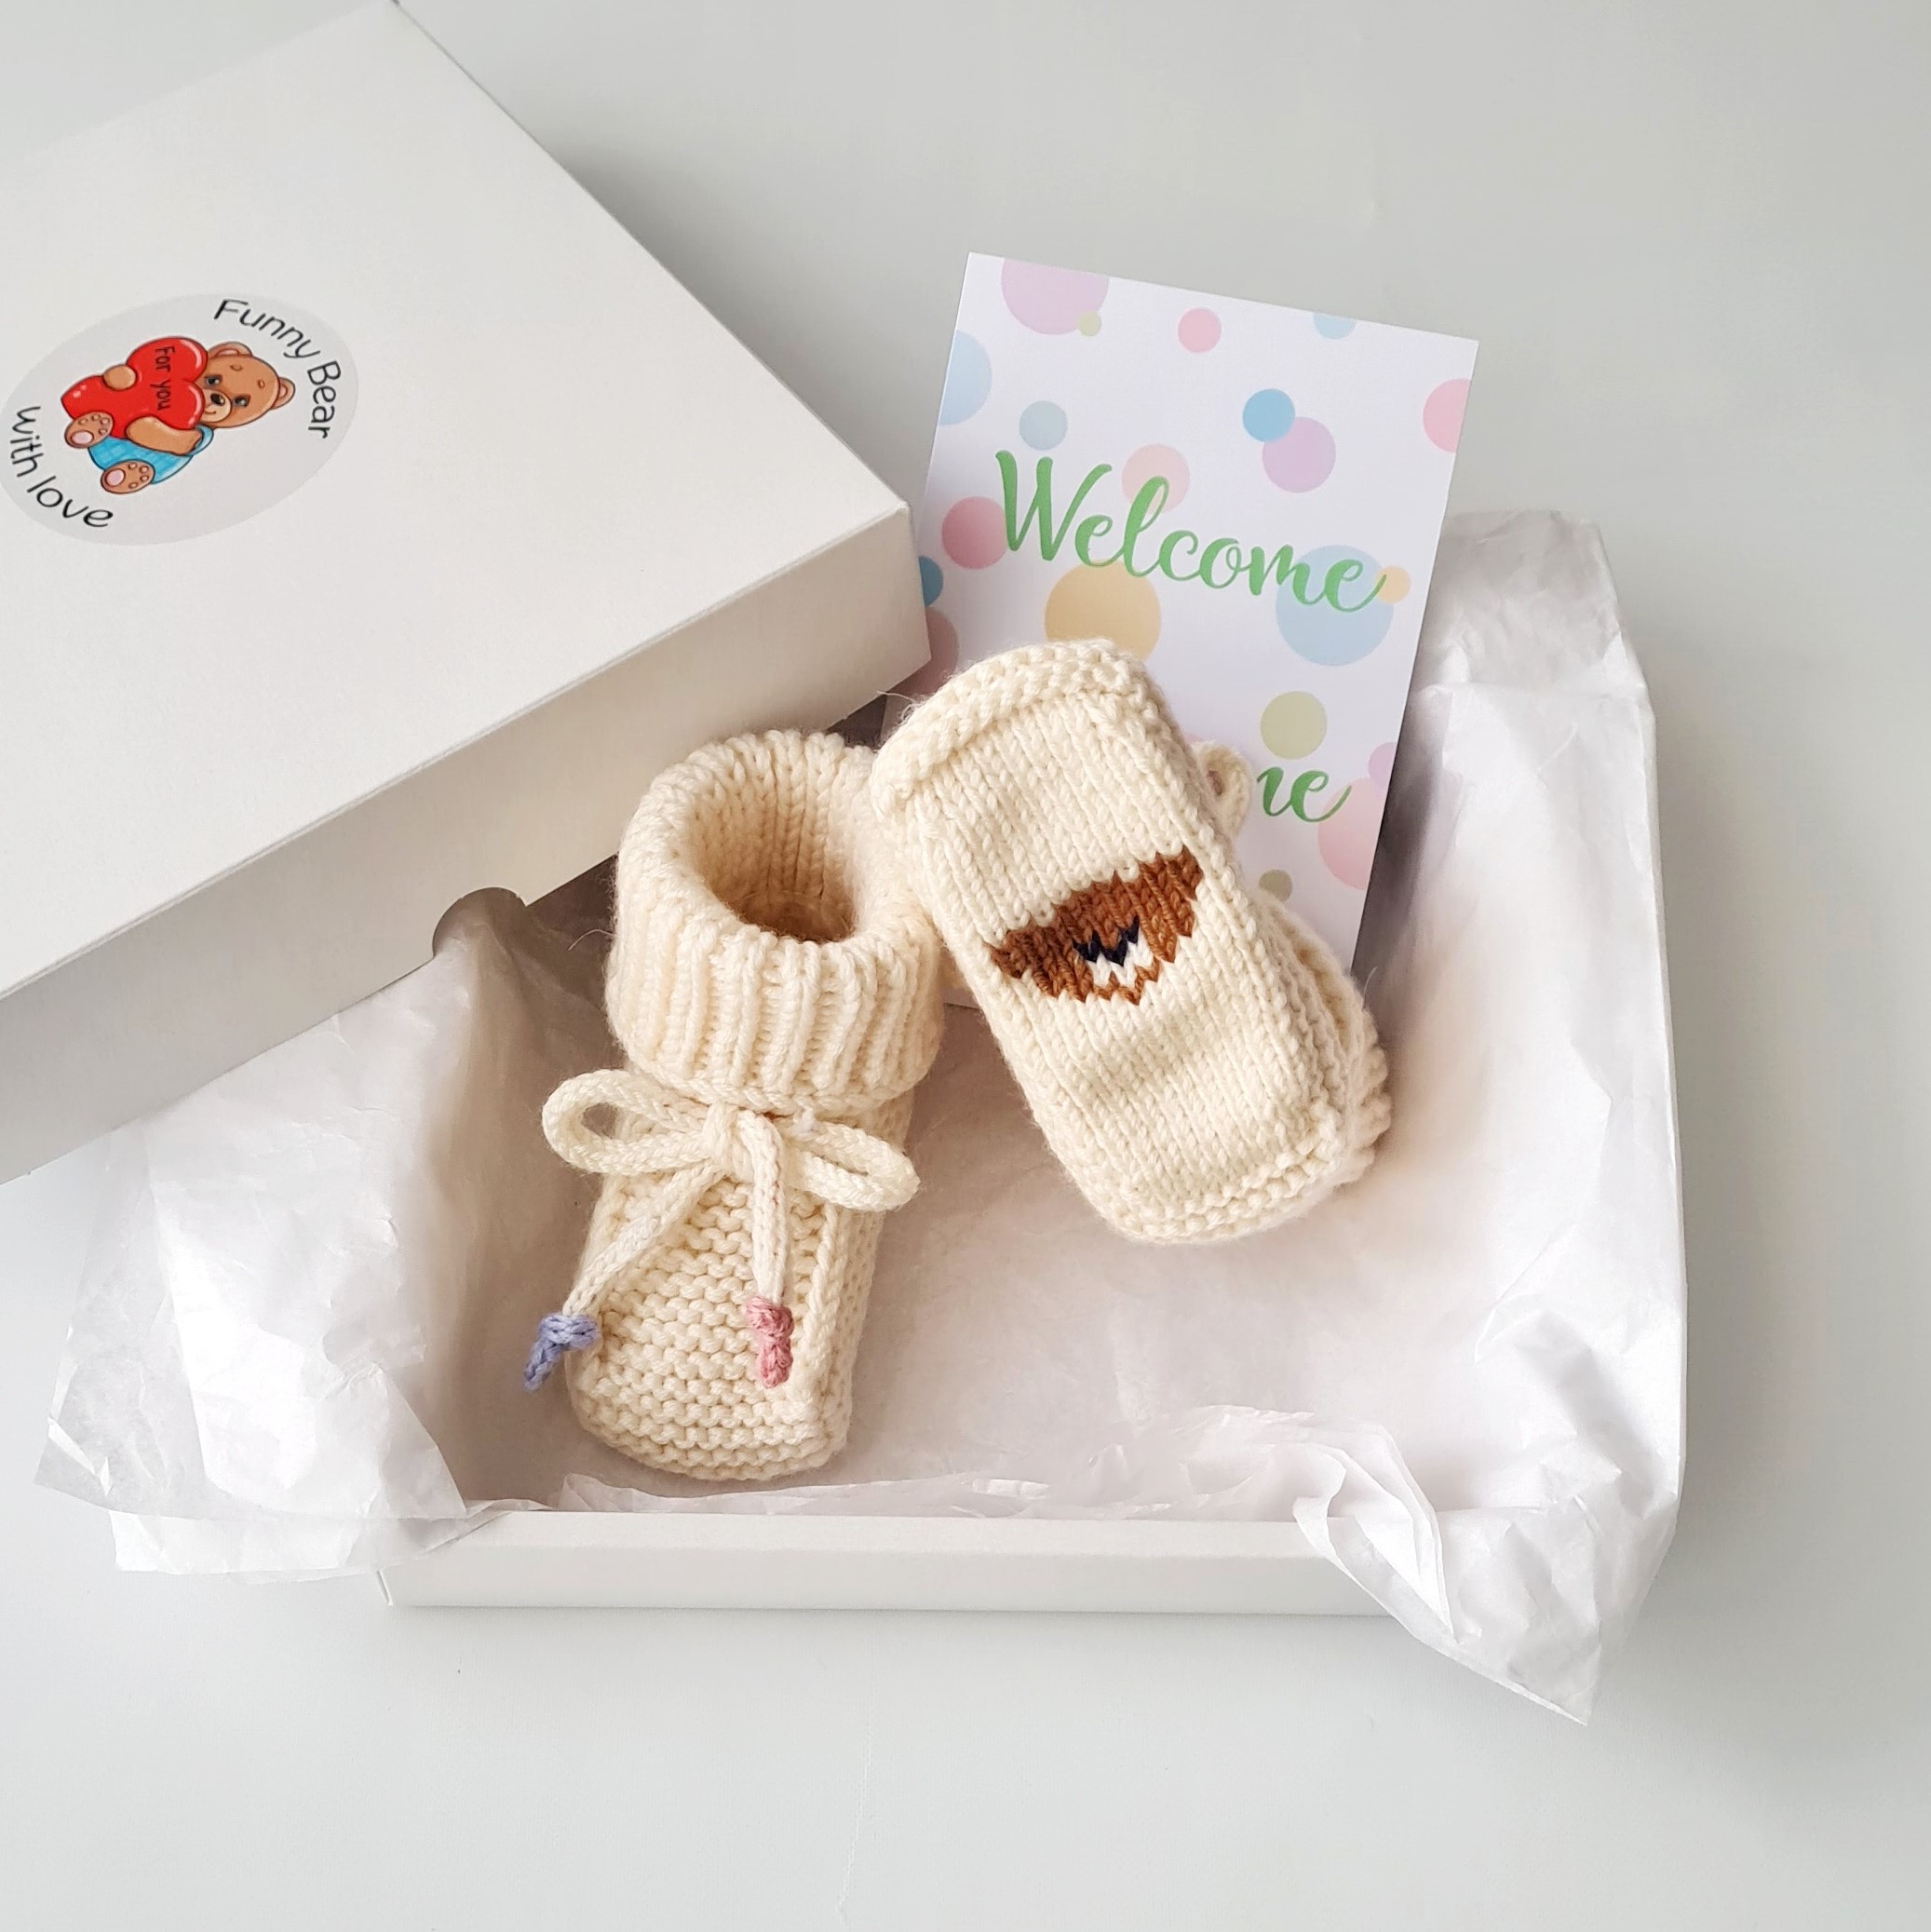 Gift Ideas to Give a Friend Struggling With Infertility - Baby Chick